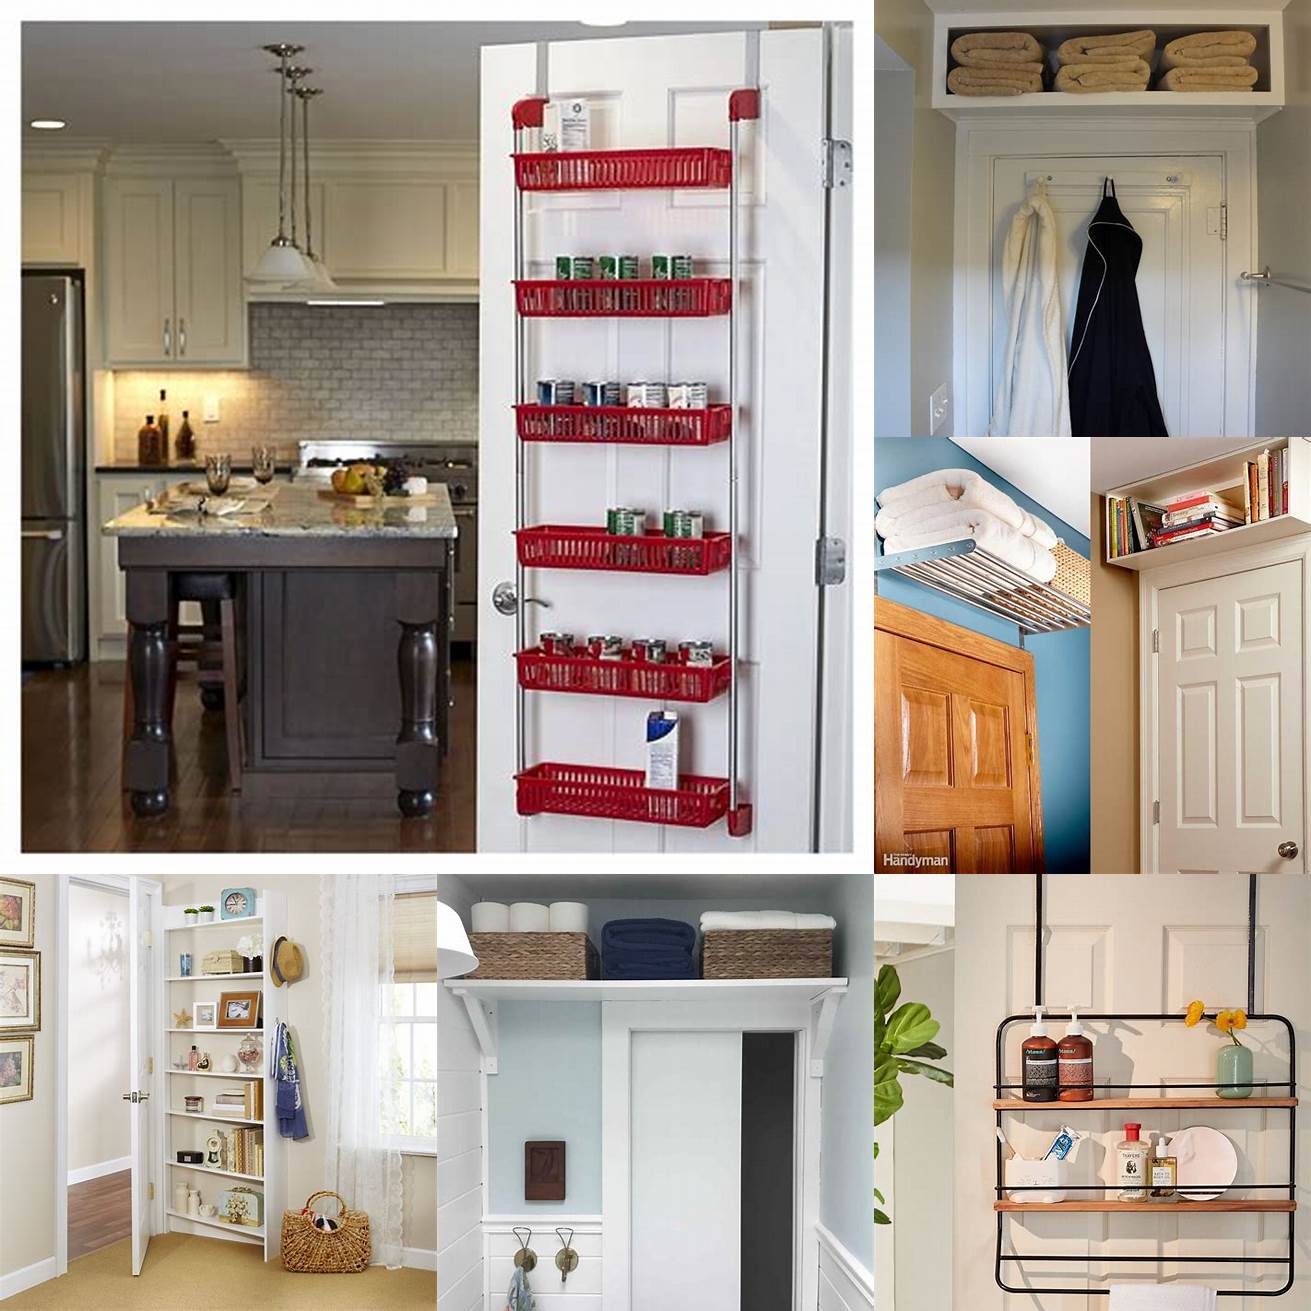 Utilize the space above the door for storage